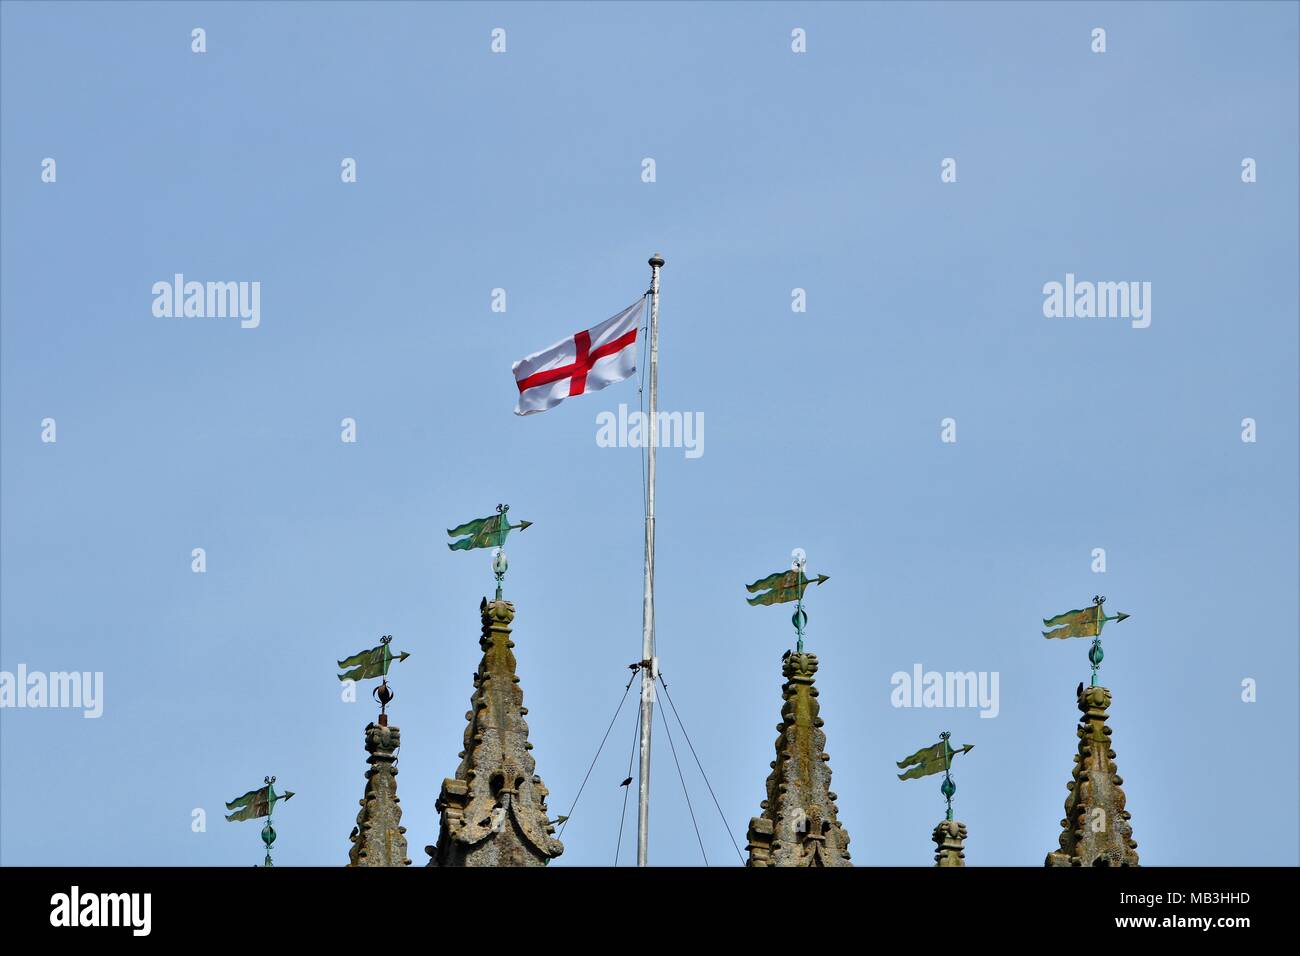 St George's flag flying in the wind on top of a church next to spirals / towers against a clear blue sky Stock Photo